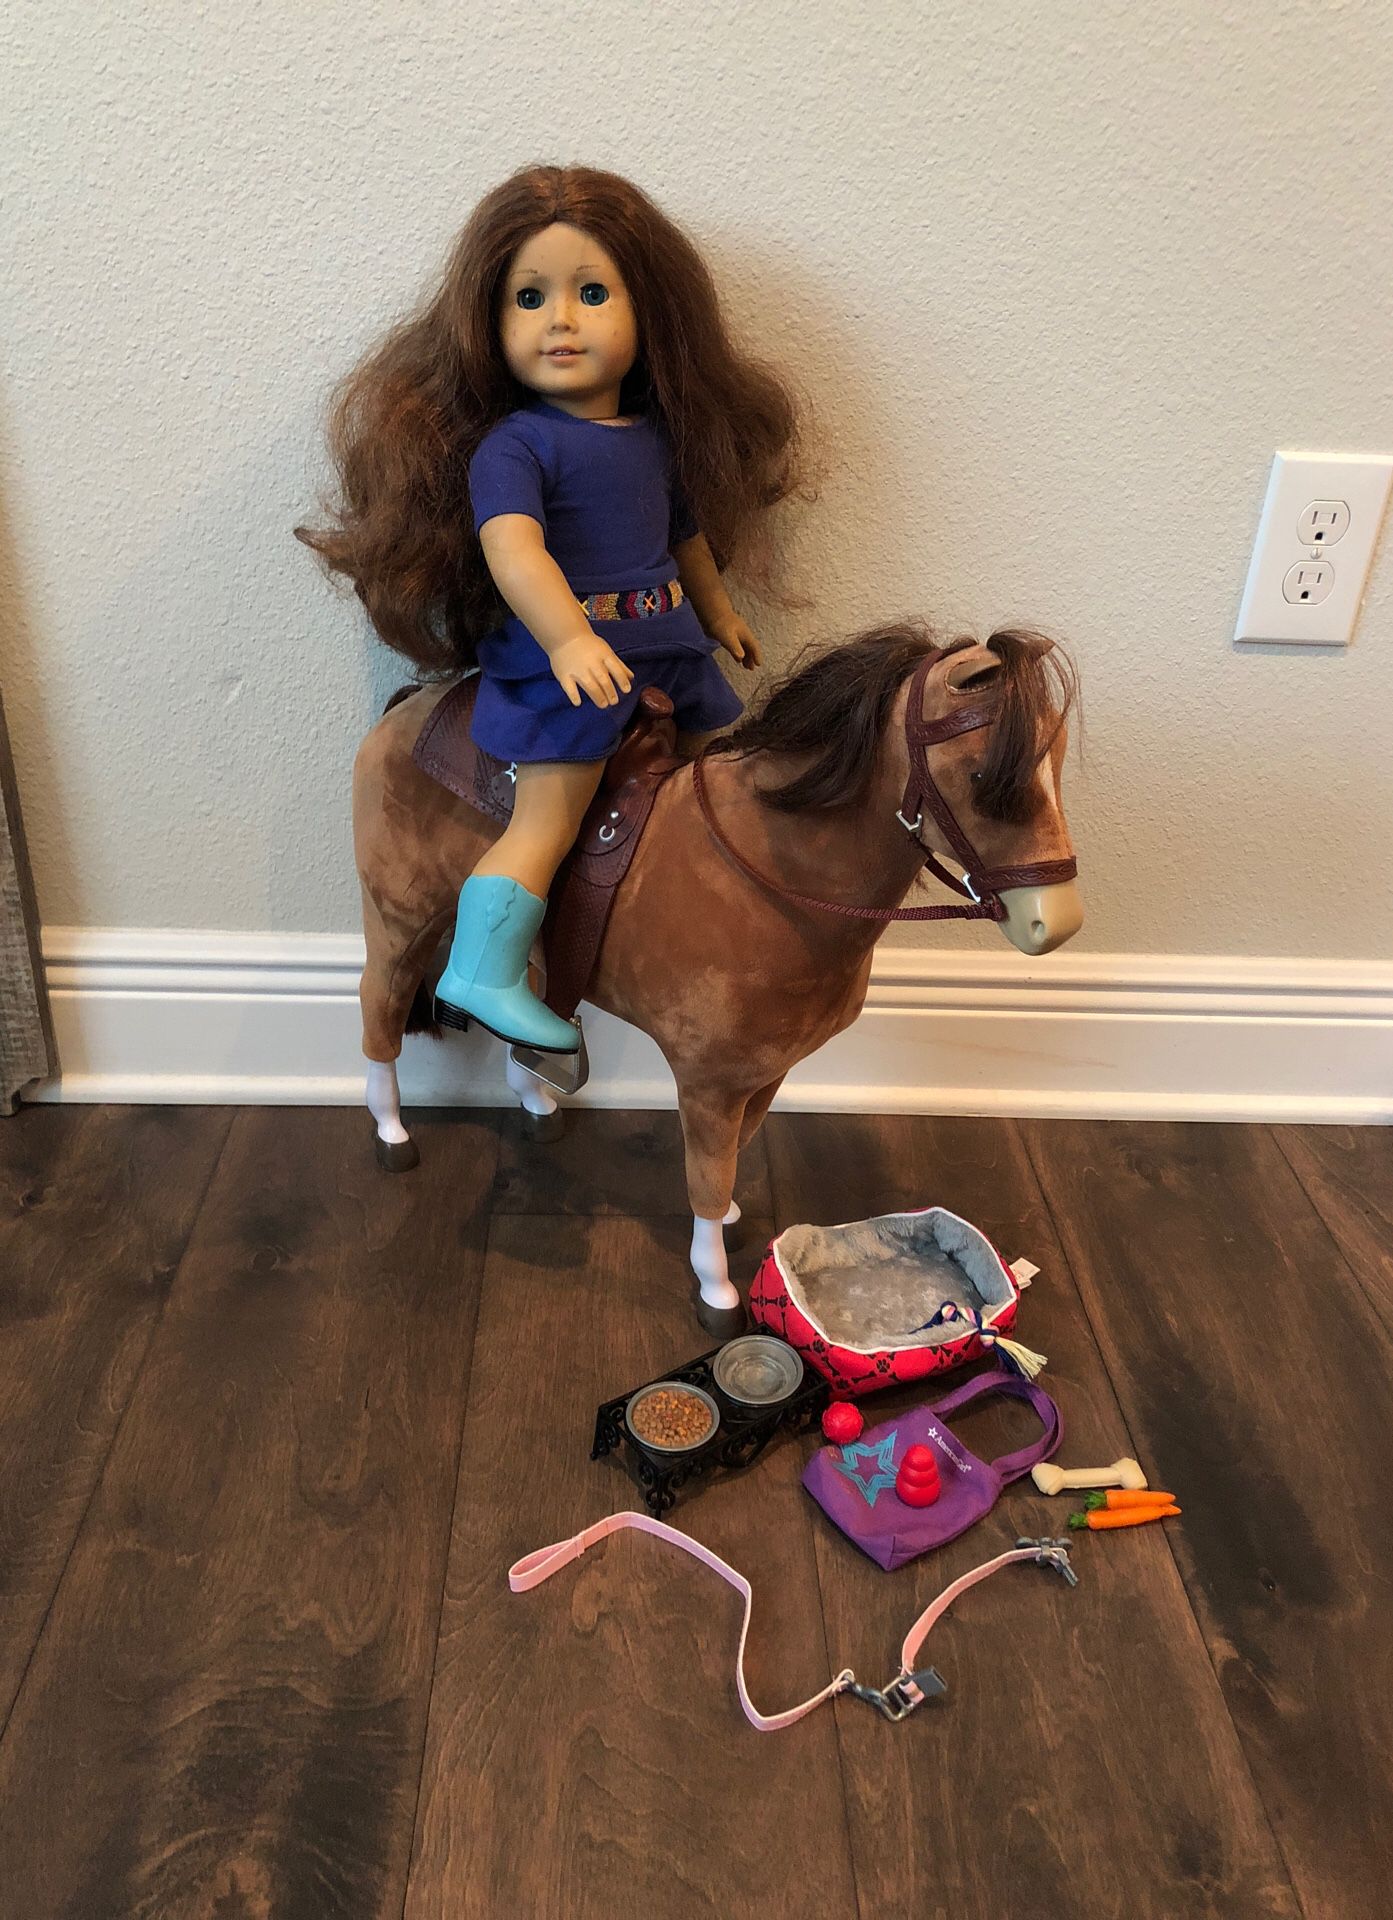 American girl doll, Sage with horse